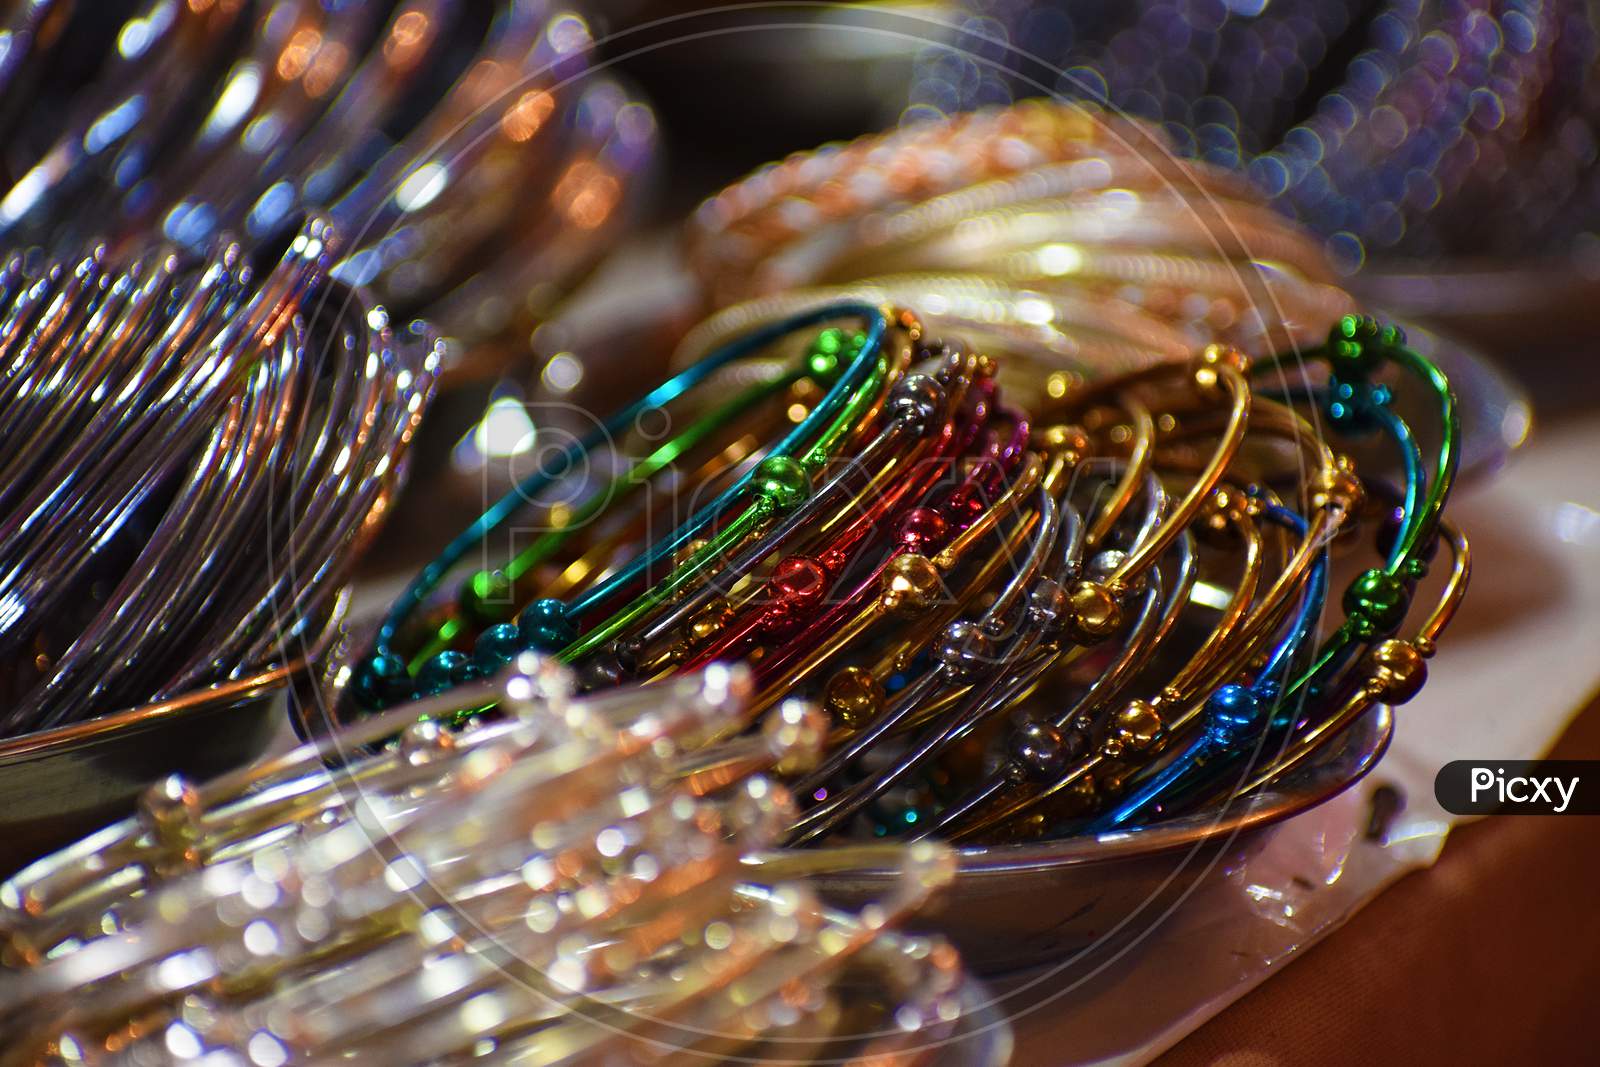 Colourful bangles from a shop in bilaspur, chhattisgarh, India. These bangles are made of metal used as beauty accessories.